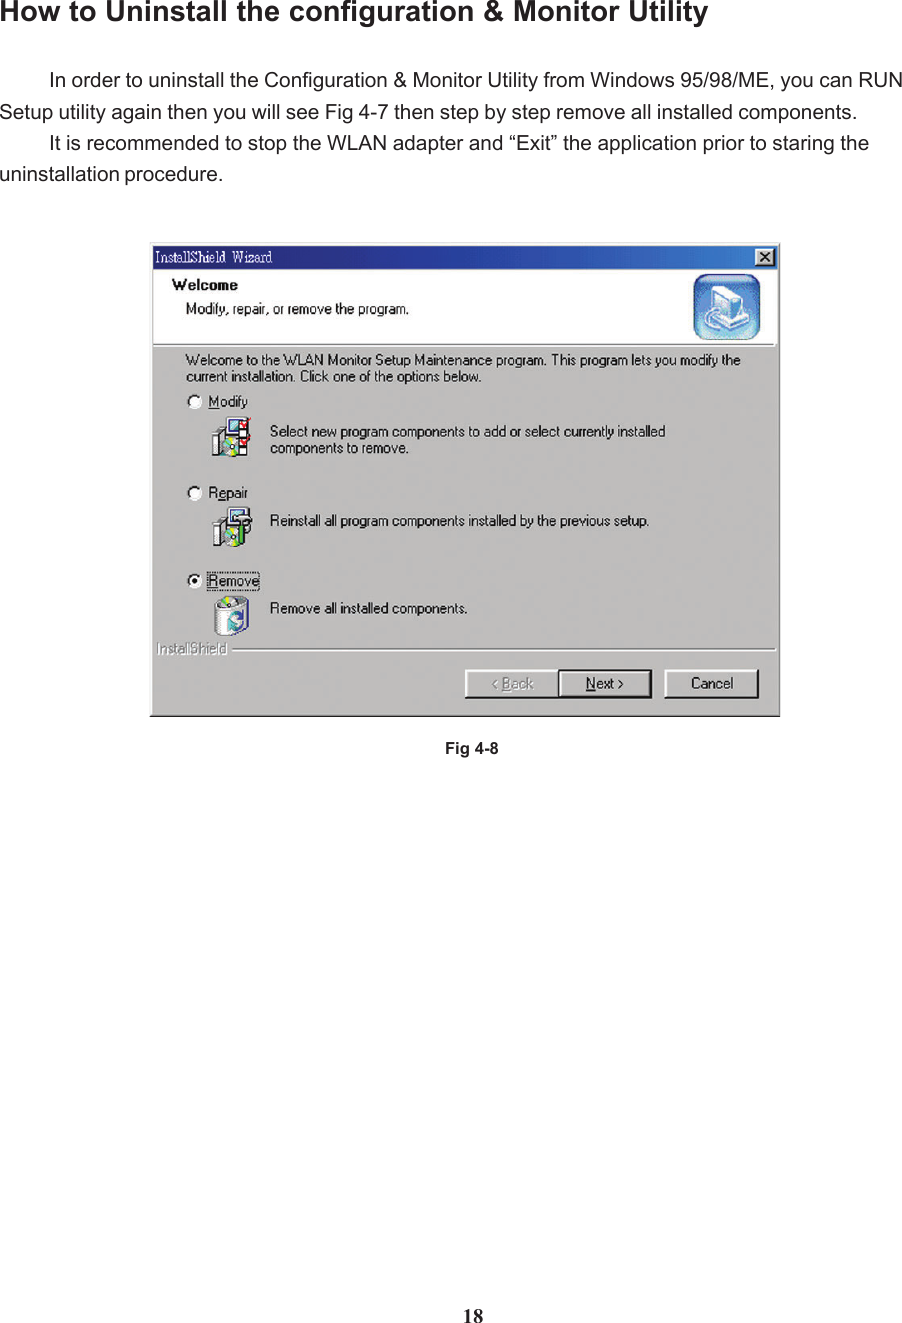 18How to Uninstall the configuration &amp; Monitor UtilityIn order to uninstall the Configuration &amp; Monitor Utility from Windows 95/98/ME, you can RUNSetup utility again then you will see Fig 4-7 then step by step remove all installed components.It is recommended to stop the WLAN adapter and “Exit” the application prior to staring theuninstallation procedure.Fig 4-8